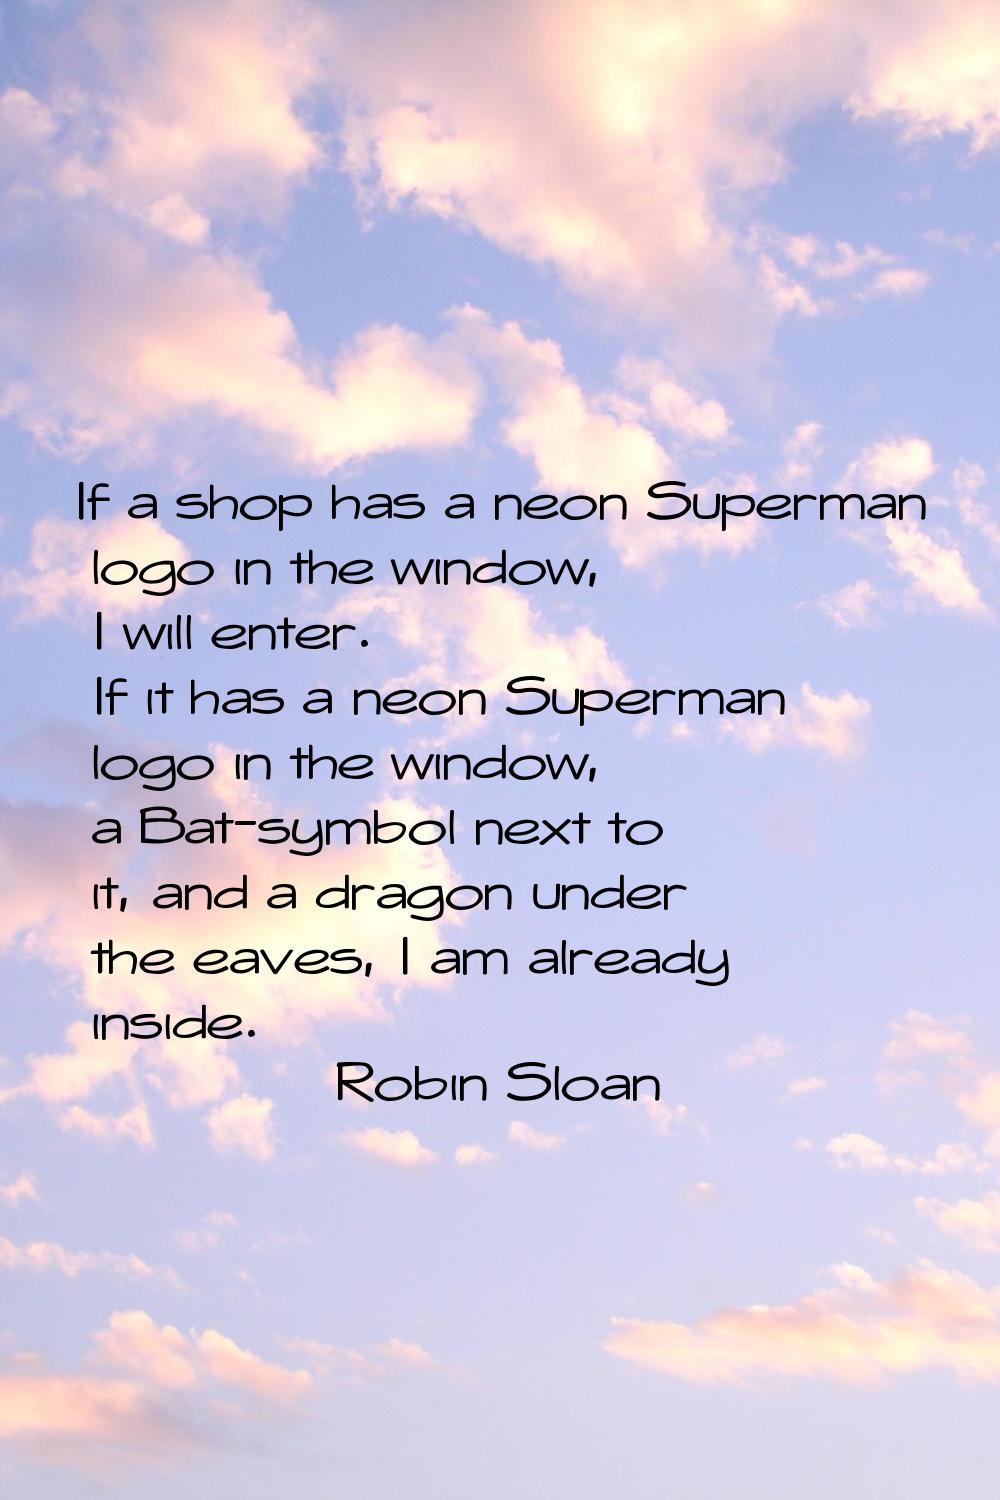 If a shop has a neon Superman logo in the window, I will enter. If it has a neon Superman logo in t